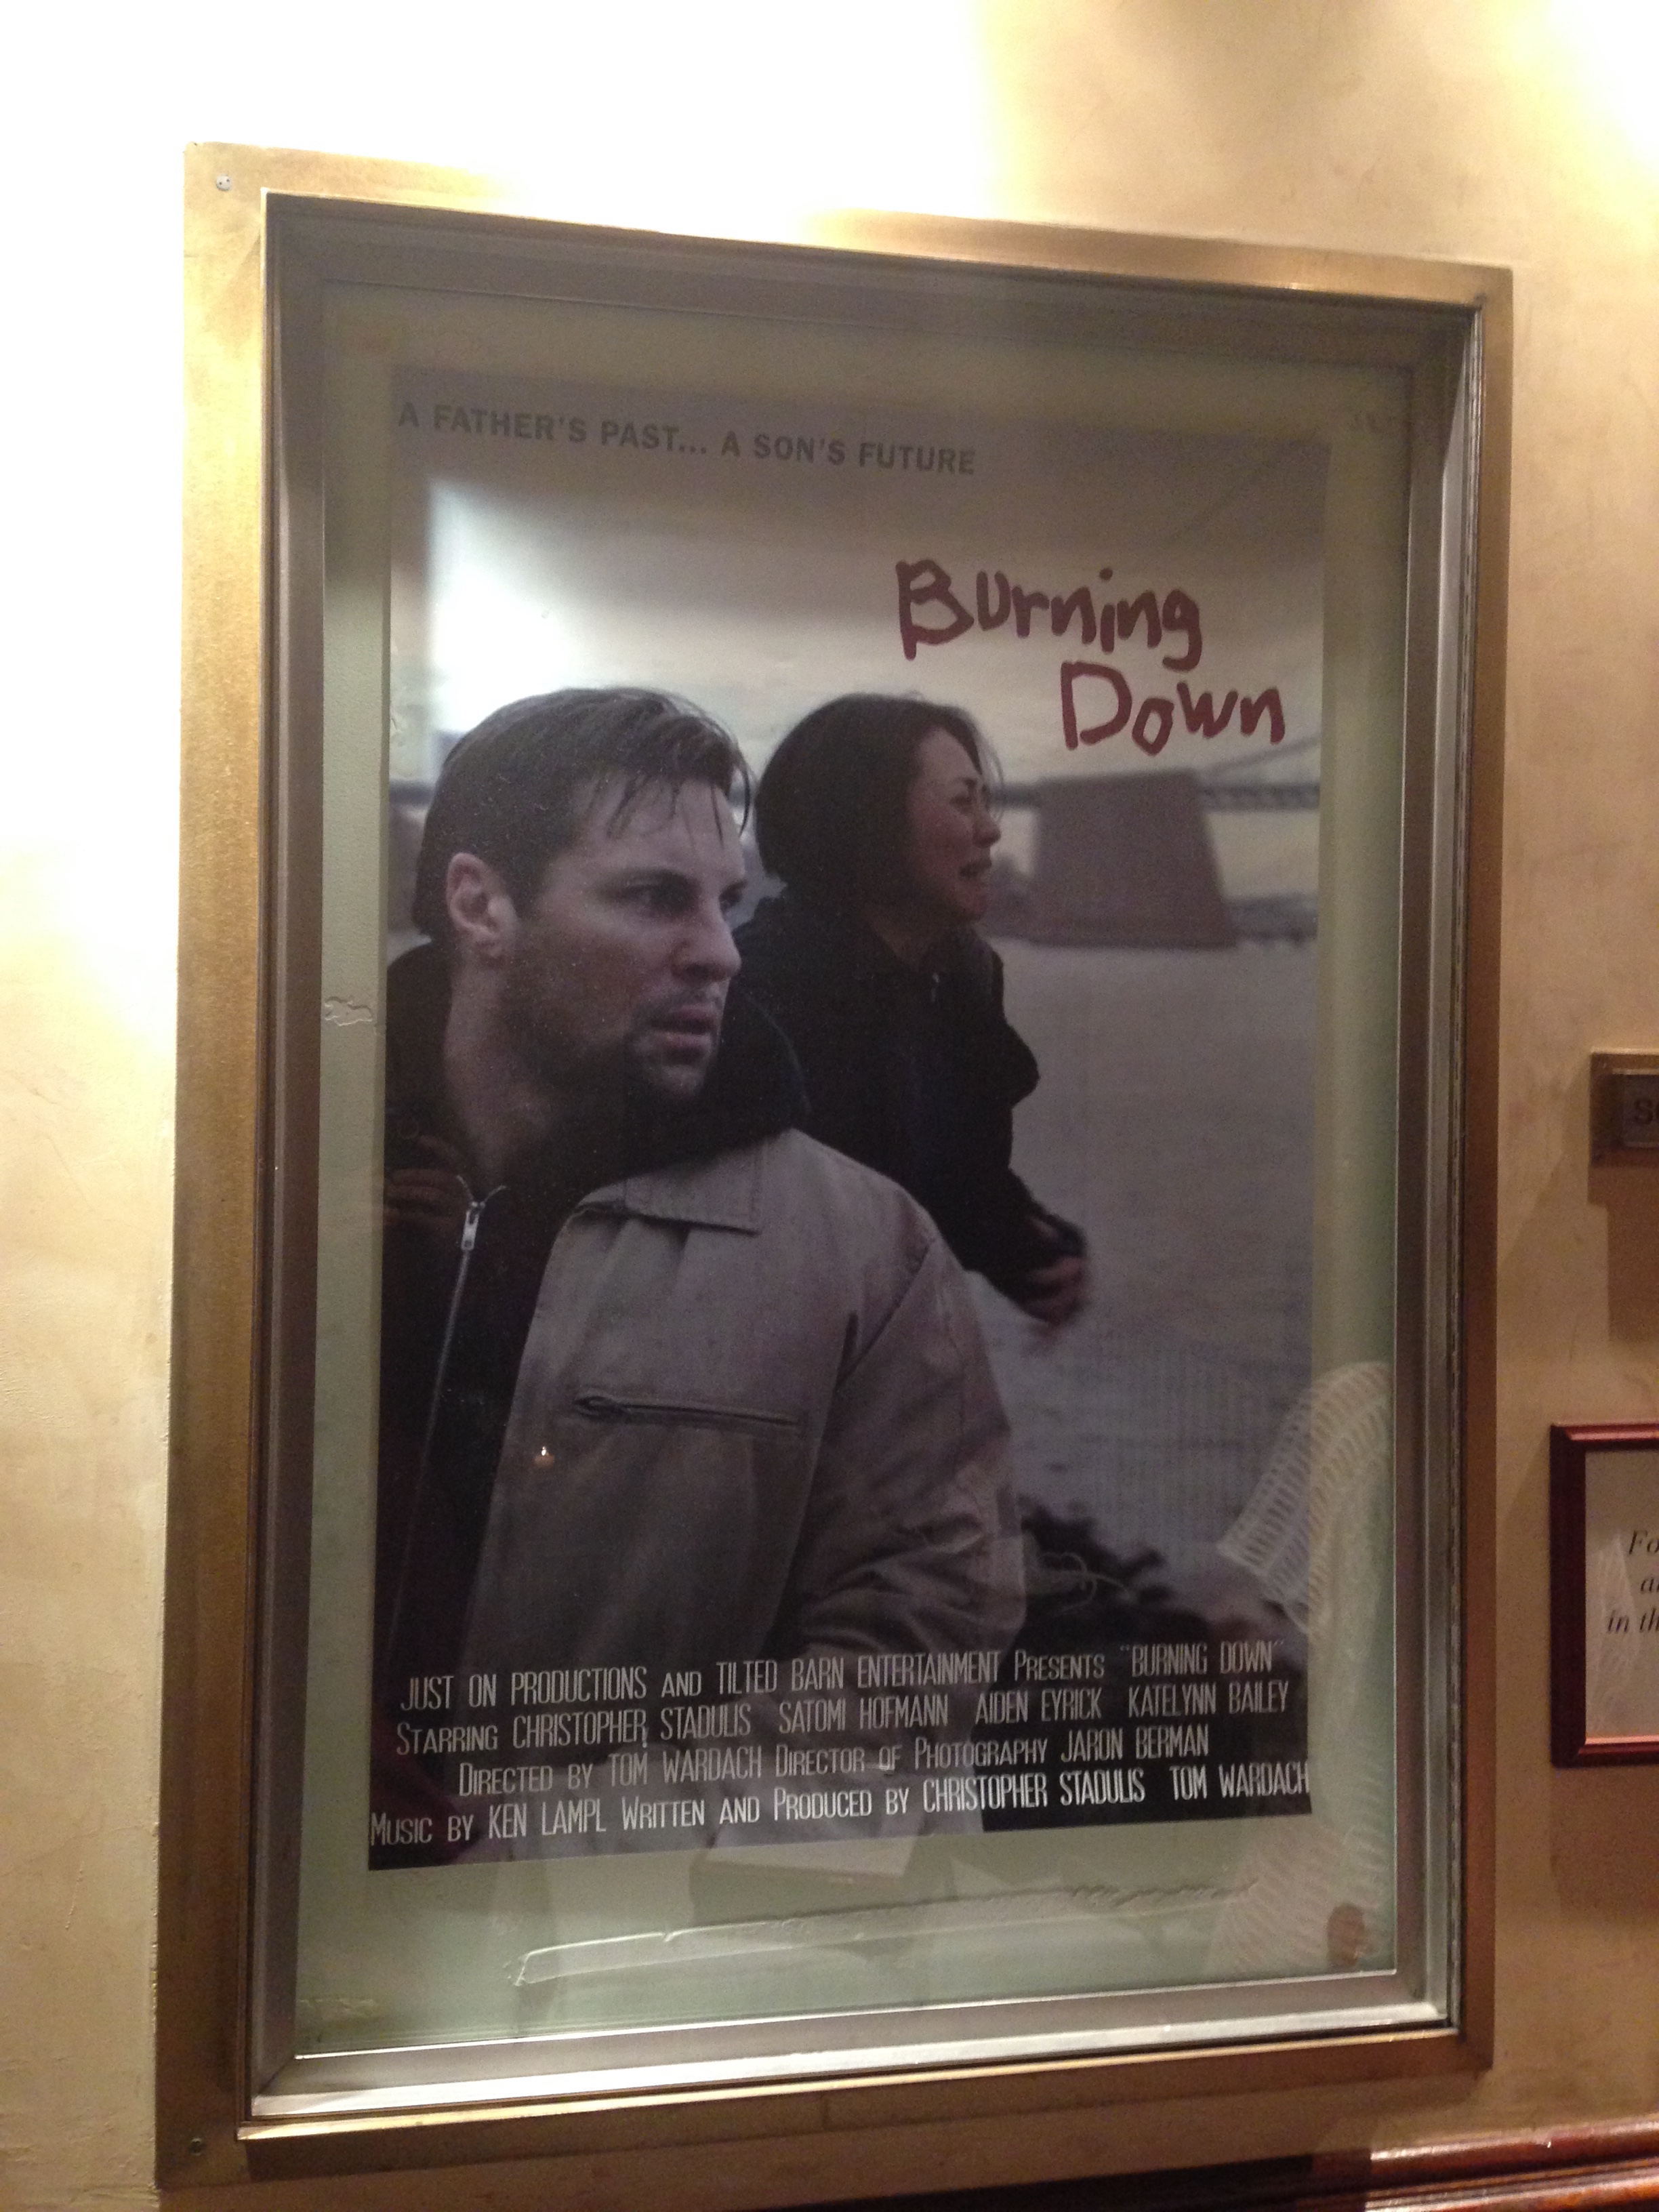 Official 'Burning Down' poster